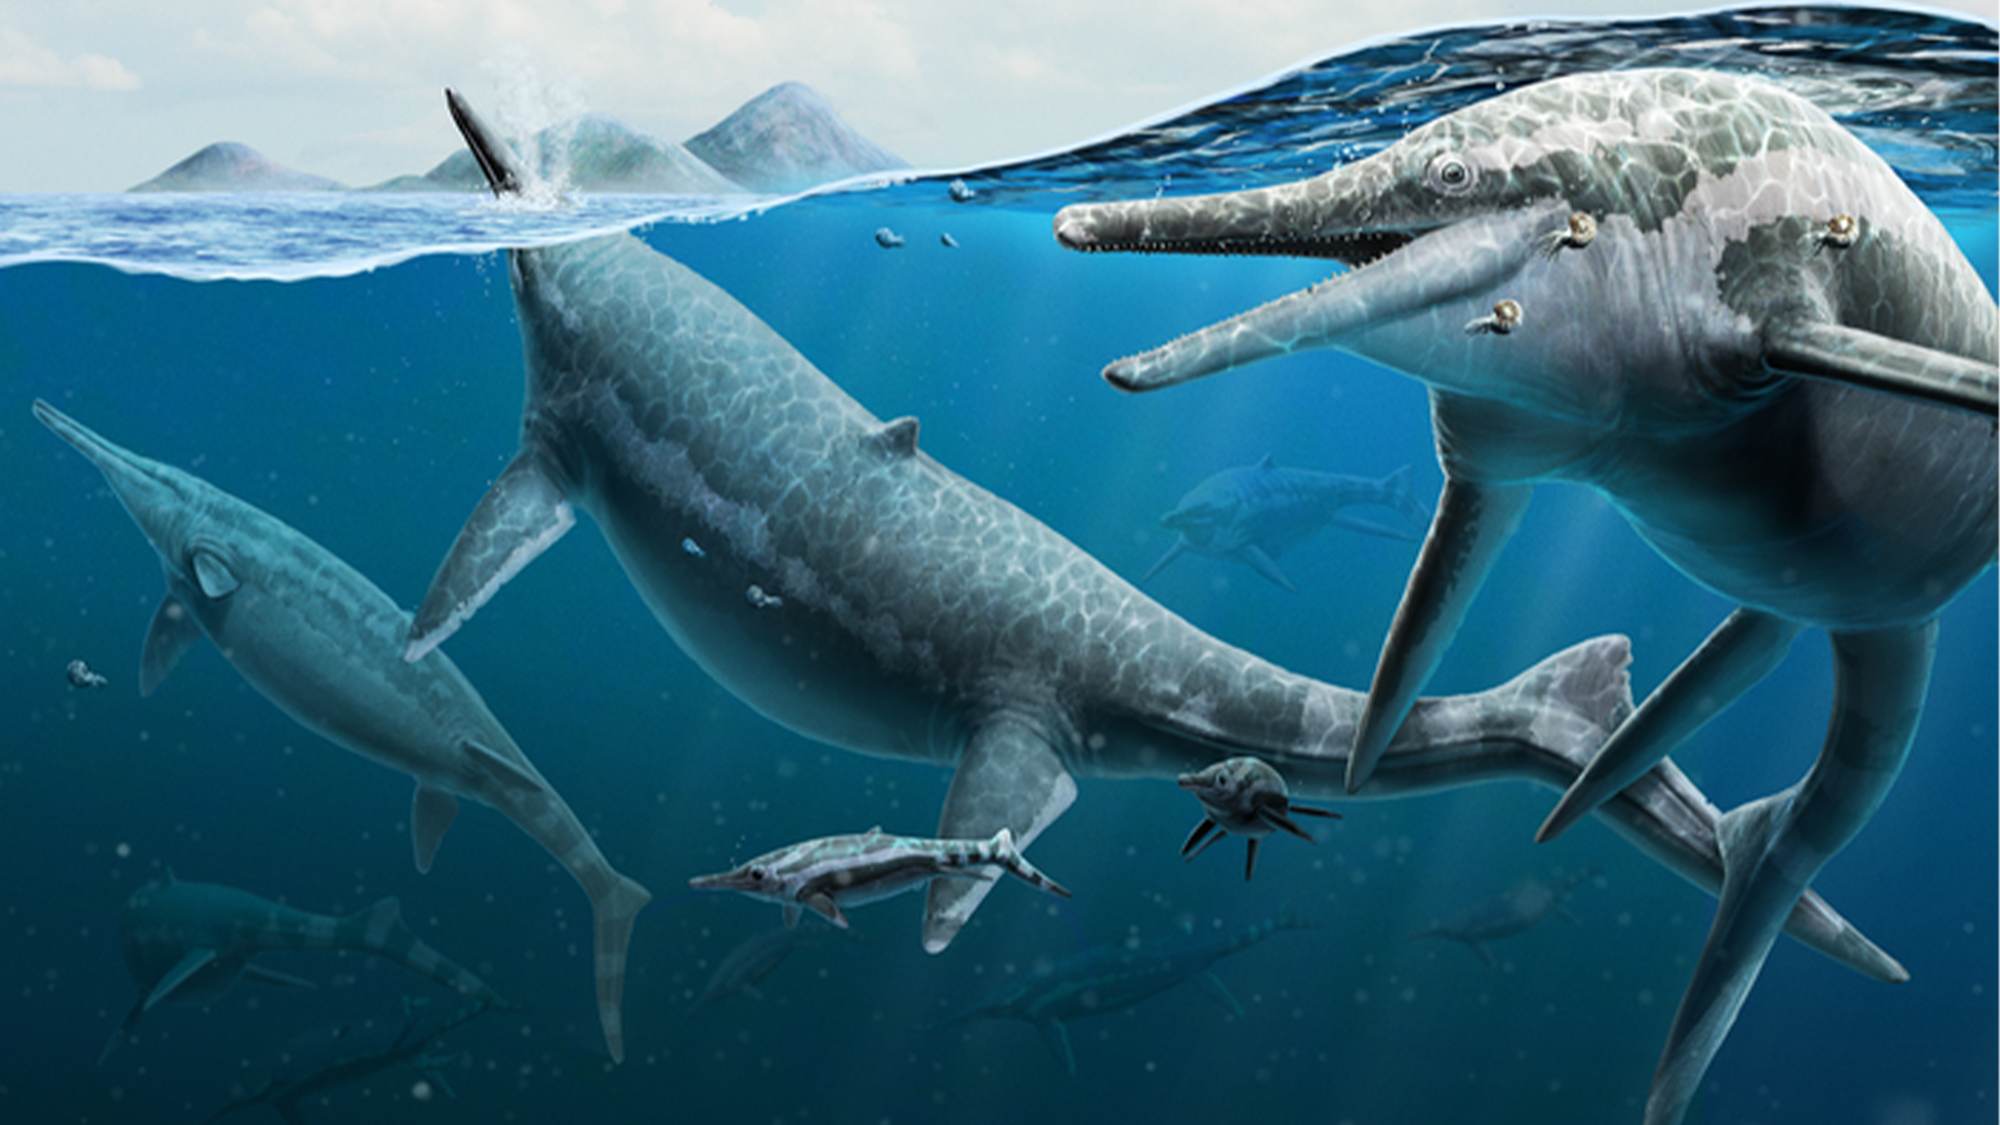 Fossil graveyard could be ancient marine birthing ground | Popular Science